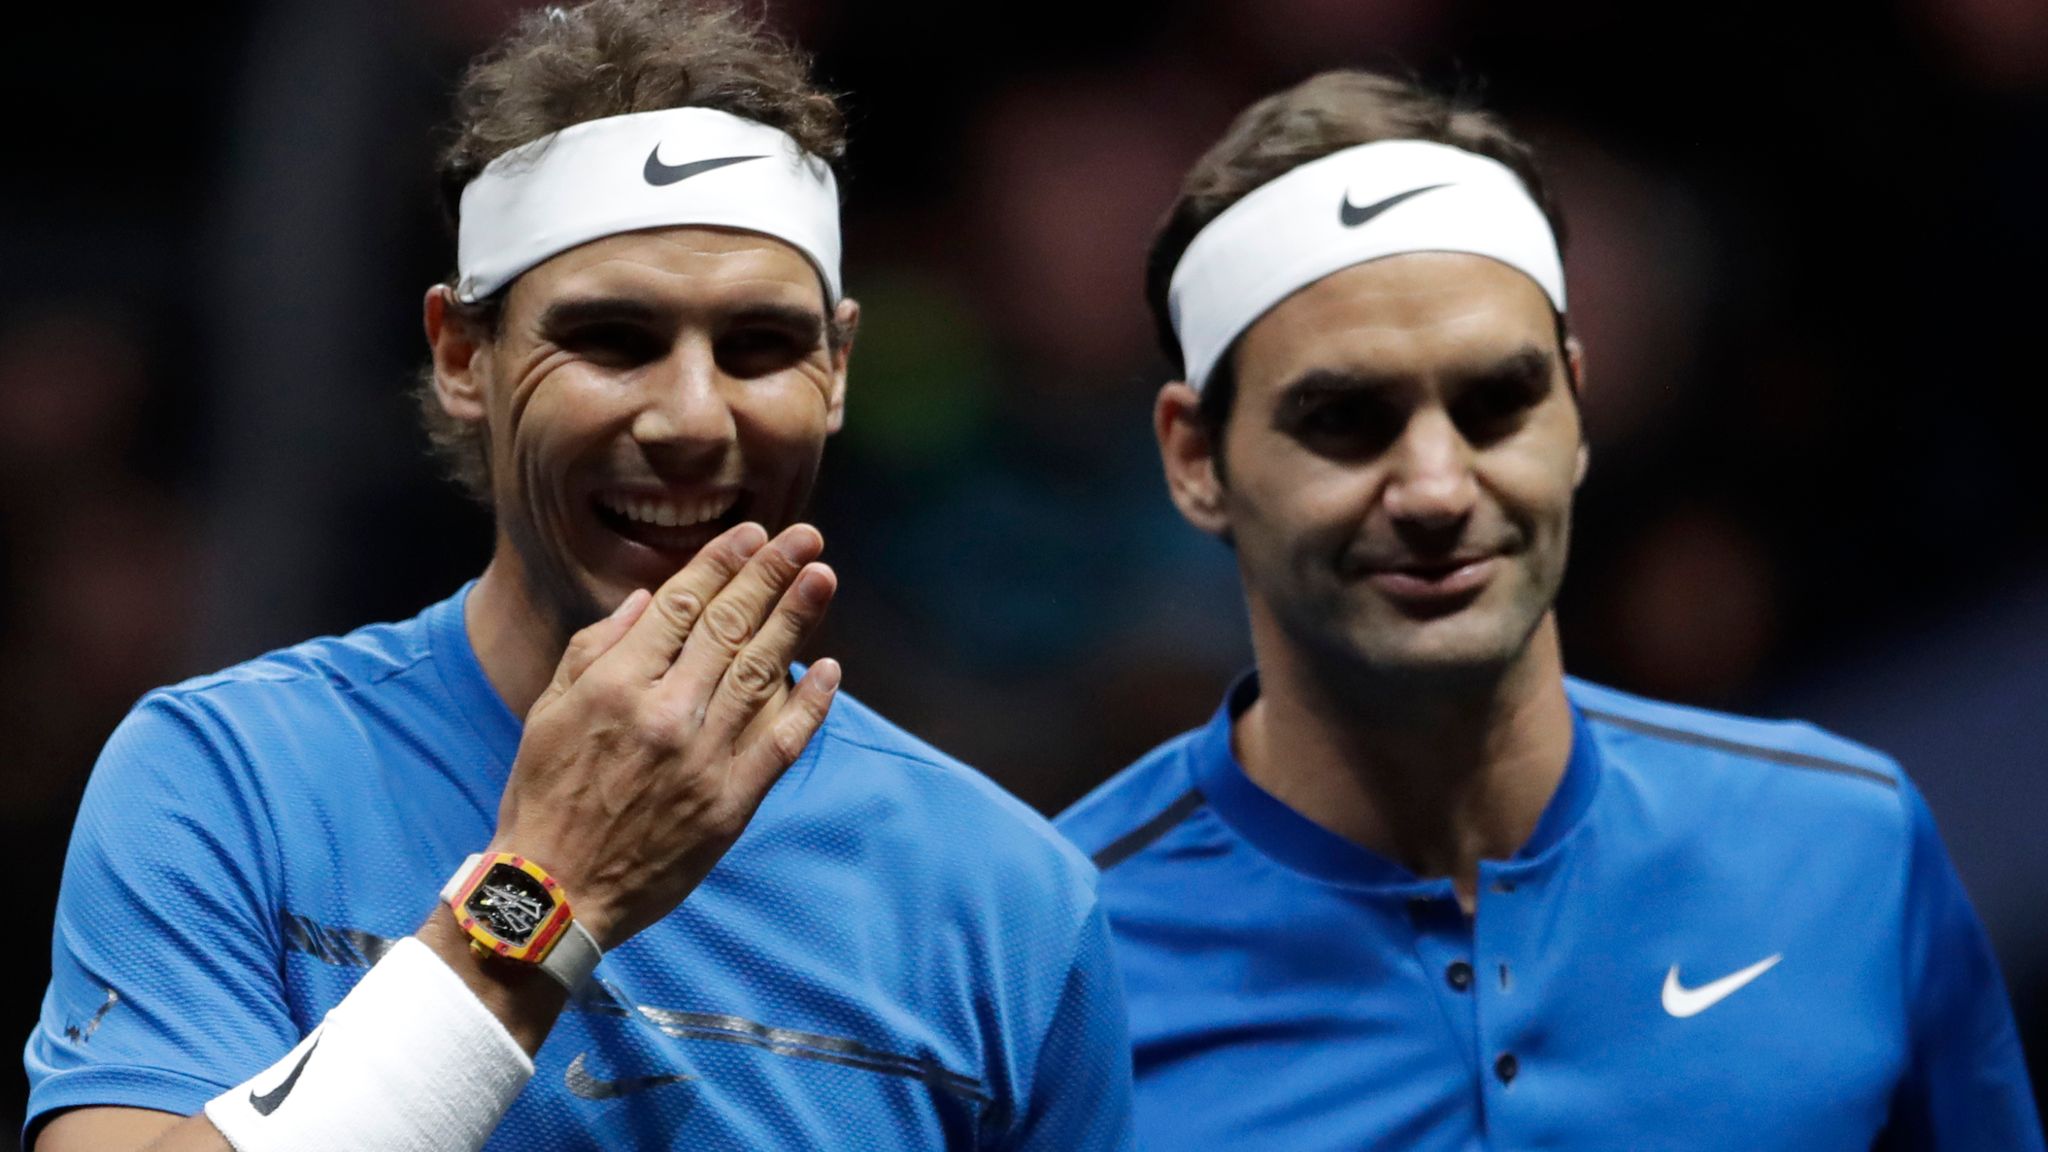 Roger Federer set to to play Laver Cup followed by Basel with Rafael Nadal ready for his return in Madrid Tennis News Sky Sports